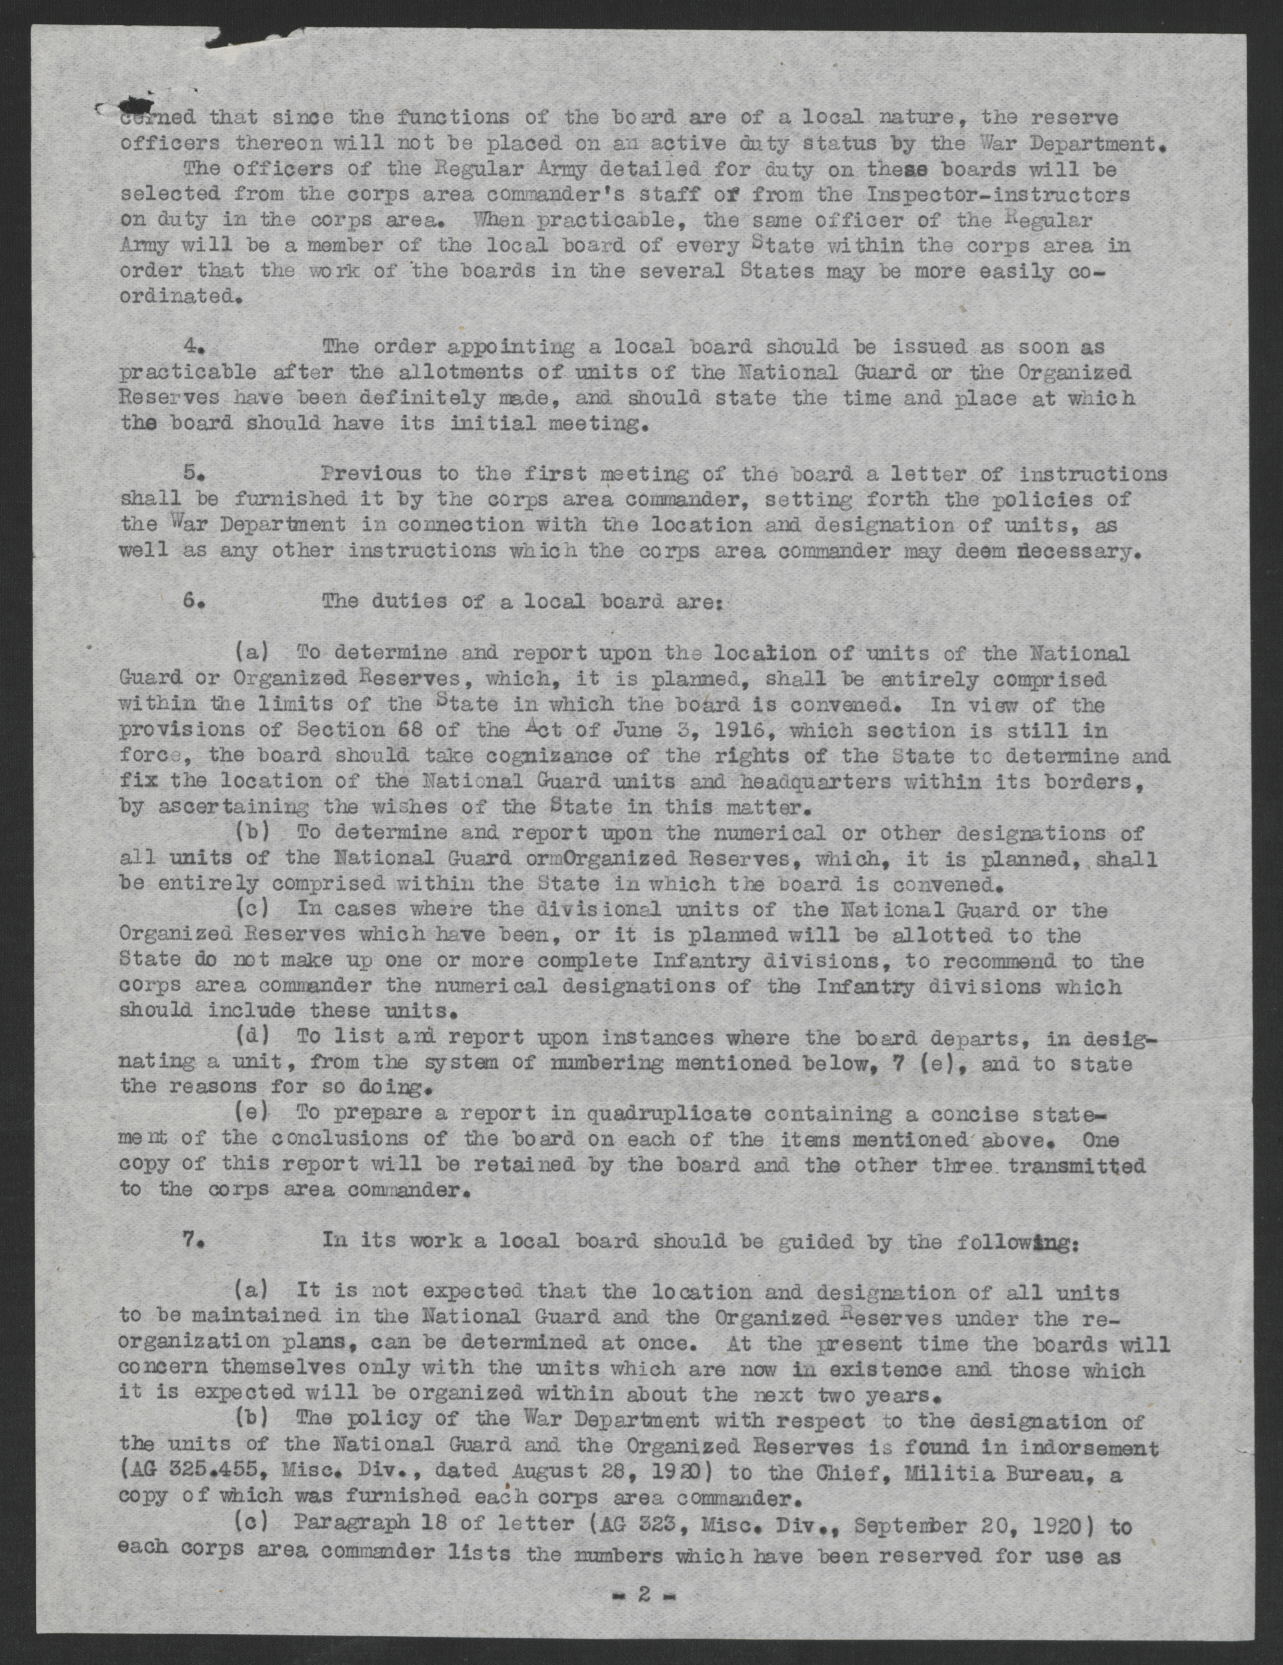 Letter from T. Hughes to the Commanding Generals of All Corps Areas, December 7, 1920, page 2